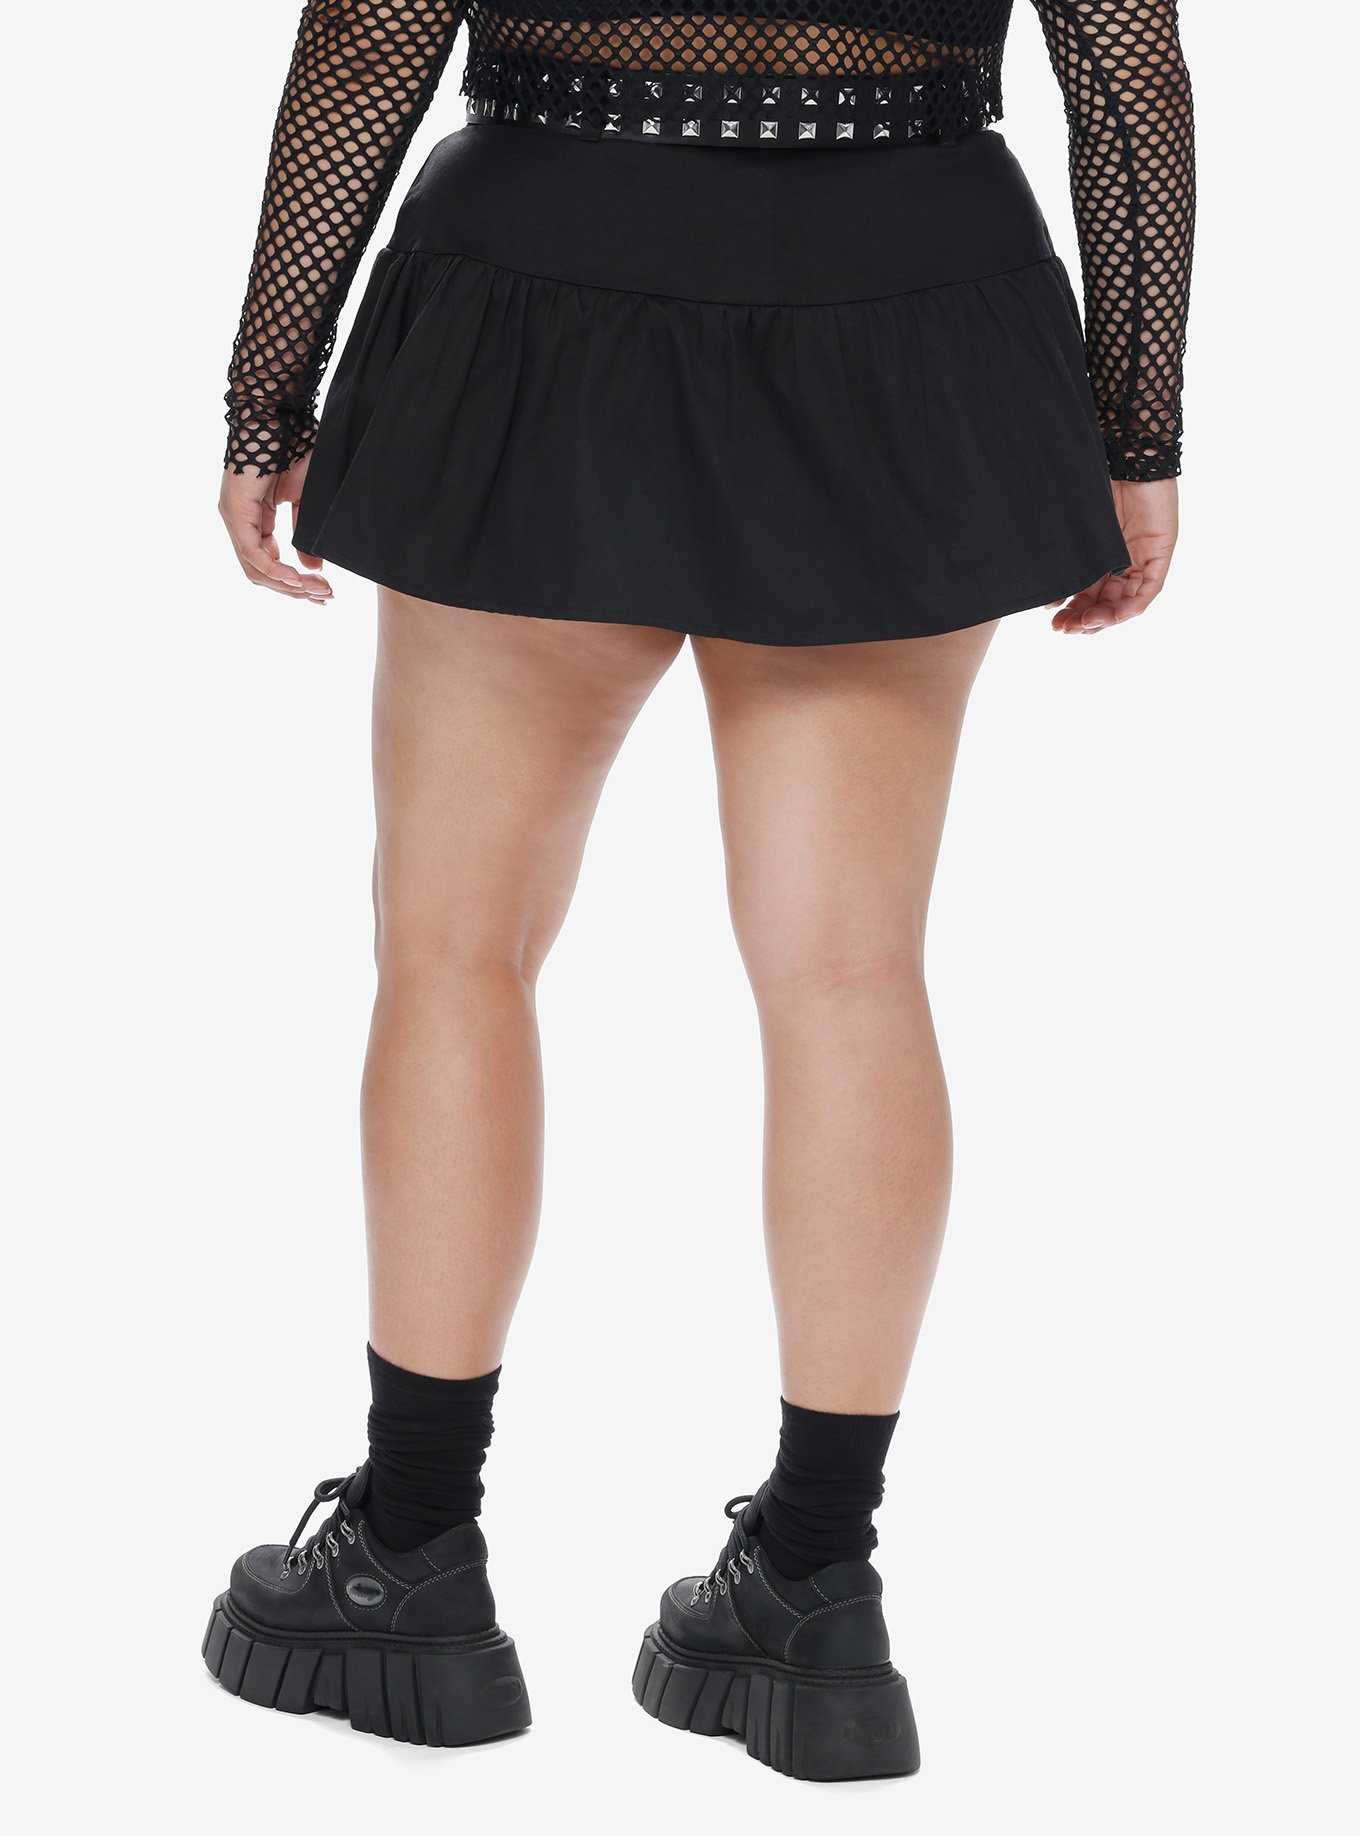 Social Collision Black Ruffle Skirt With Belt Plus Size, , hi-res